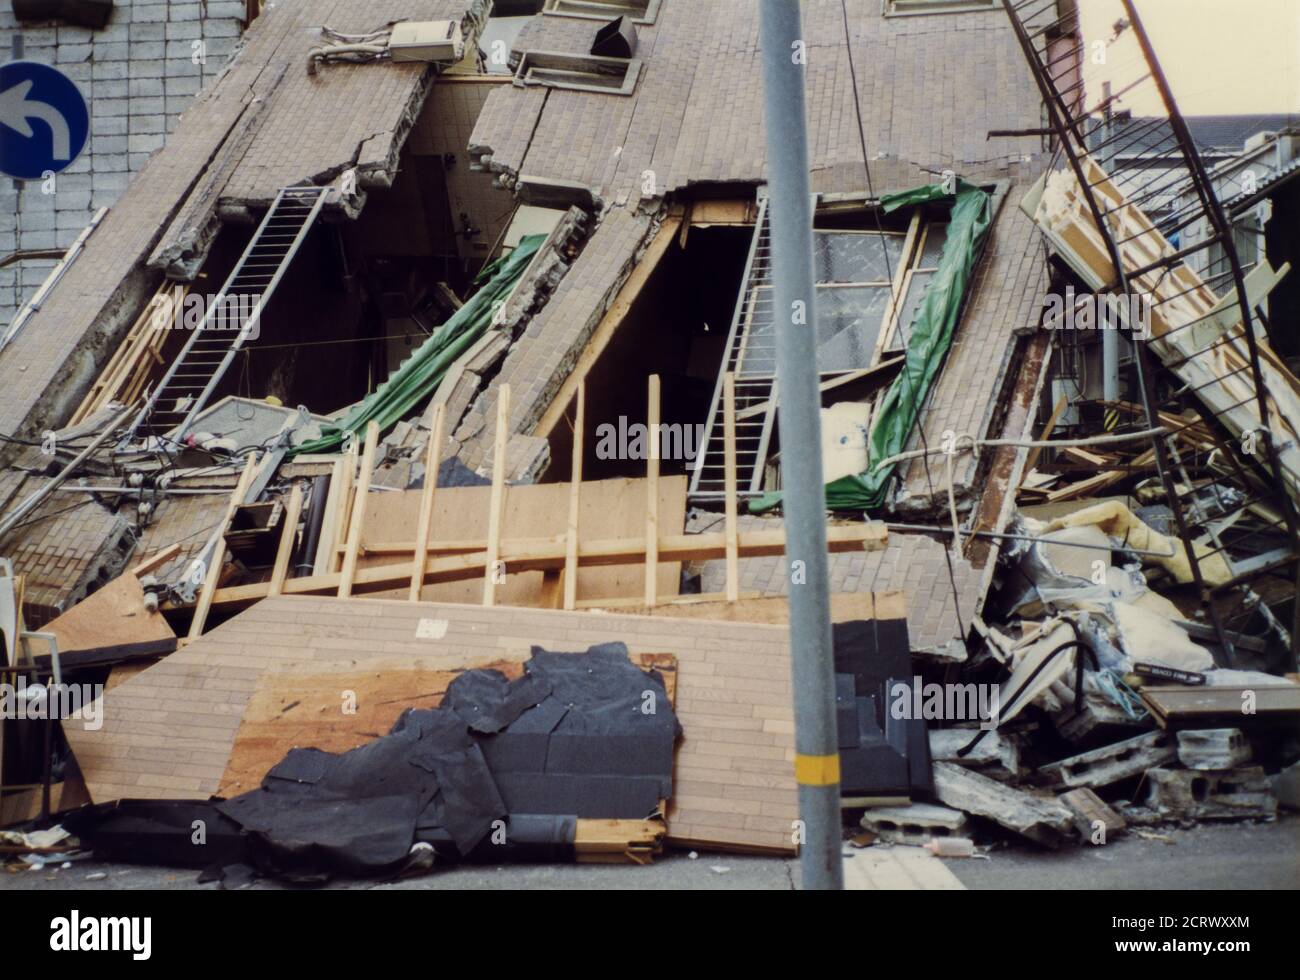 Apartment complex collapsed on its side damaged from the 1995 Great Hanshin Earthquake in Kobe, Japan Stock Photo